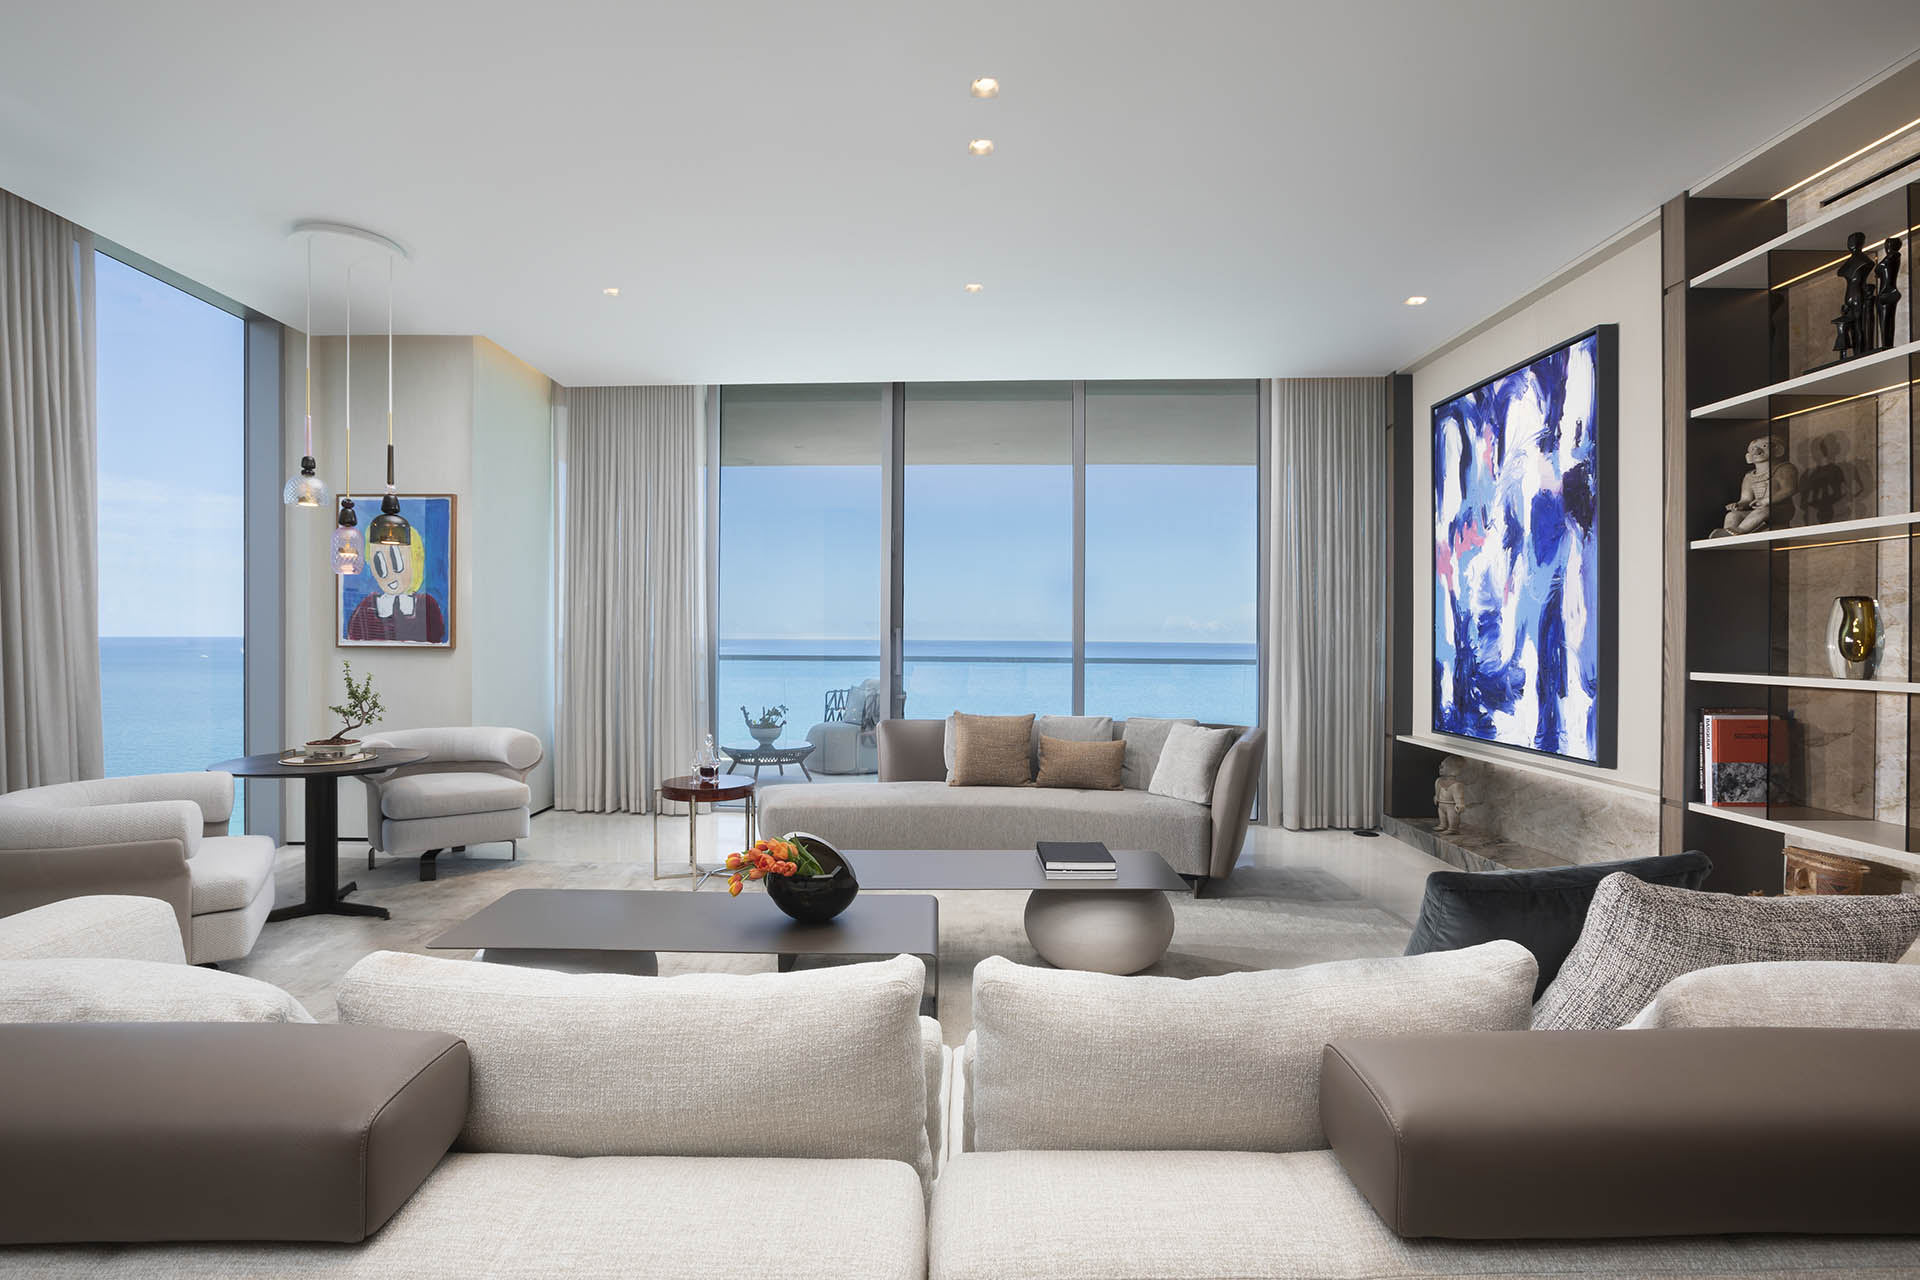  A sea-found object designed in luxury condo format. The Turnberry Ocean Club by DKOR Interiors